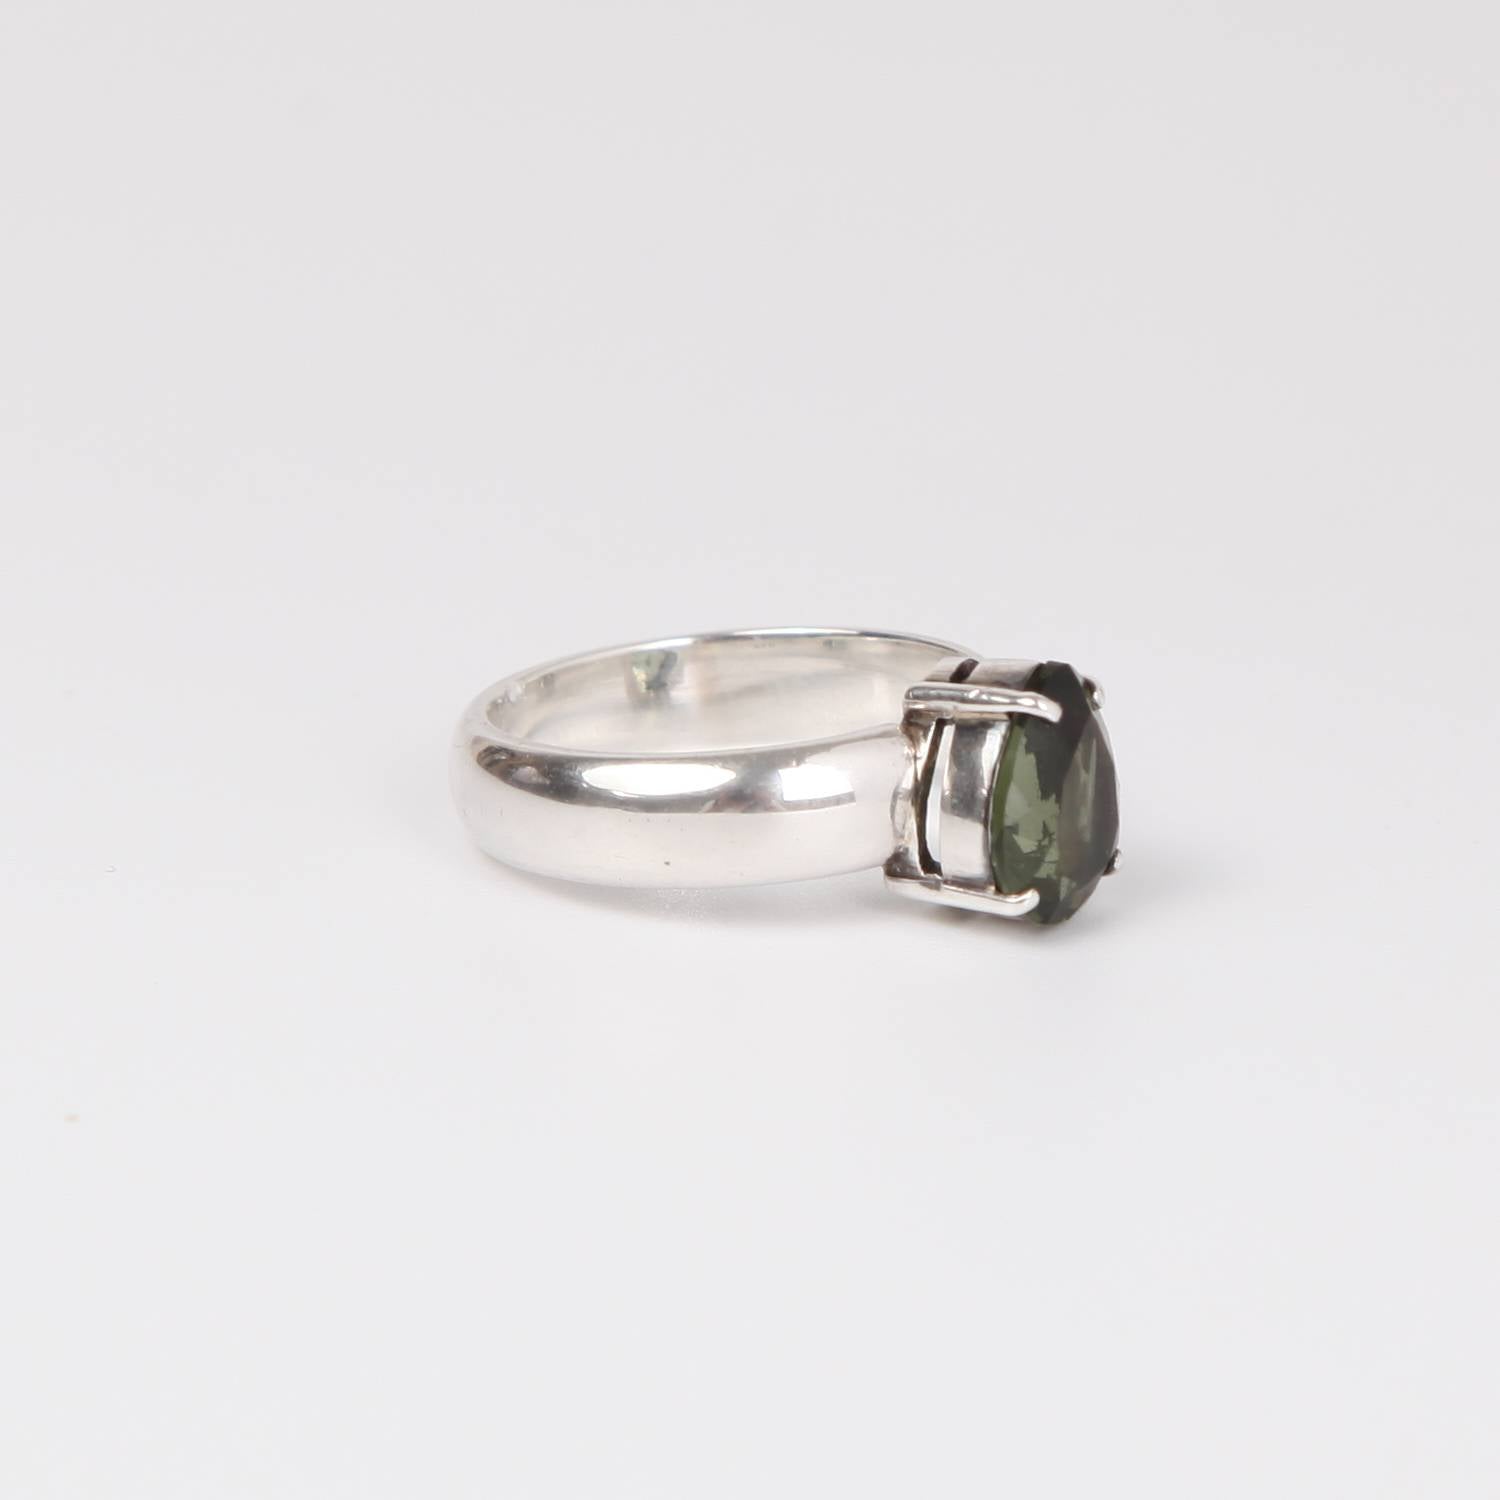 Sterling Silver Ring with Moldavite (meteorite) Triangle